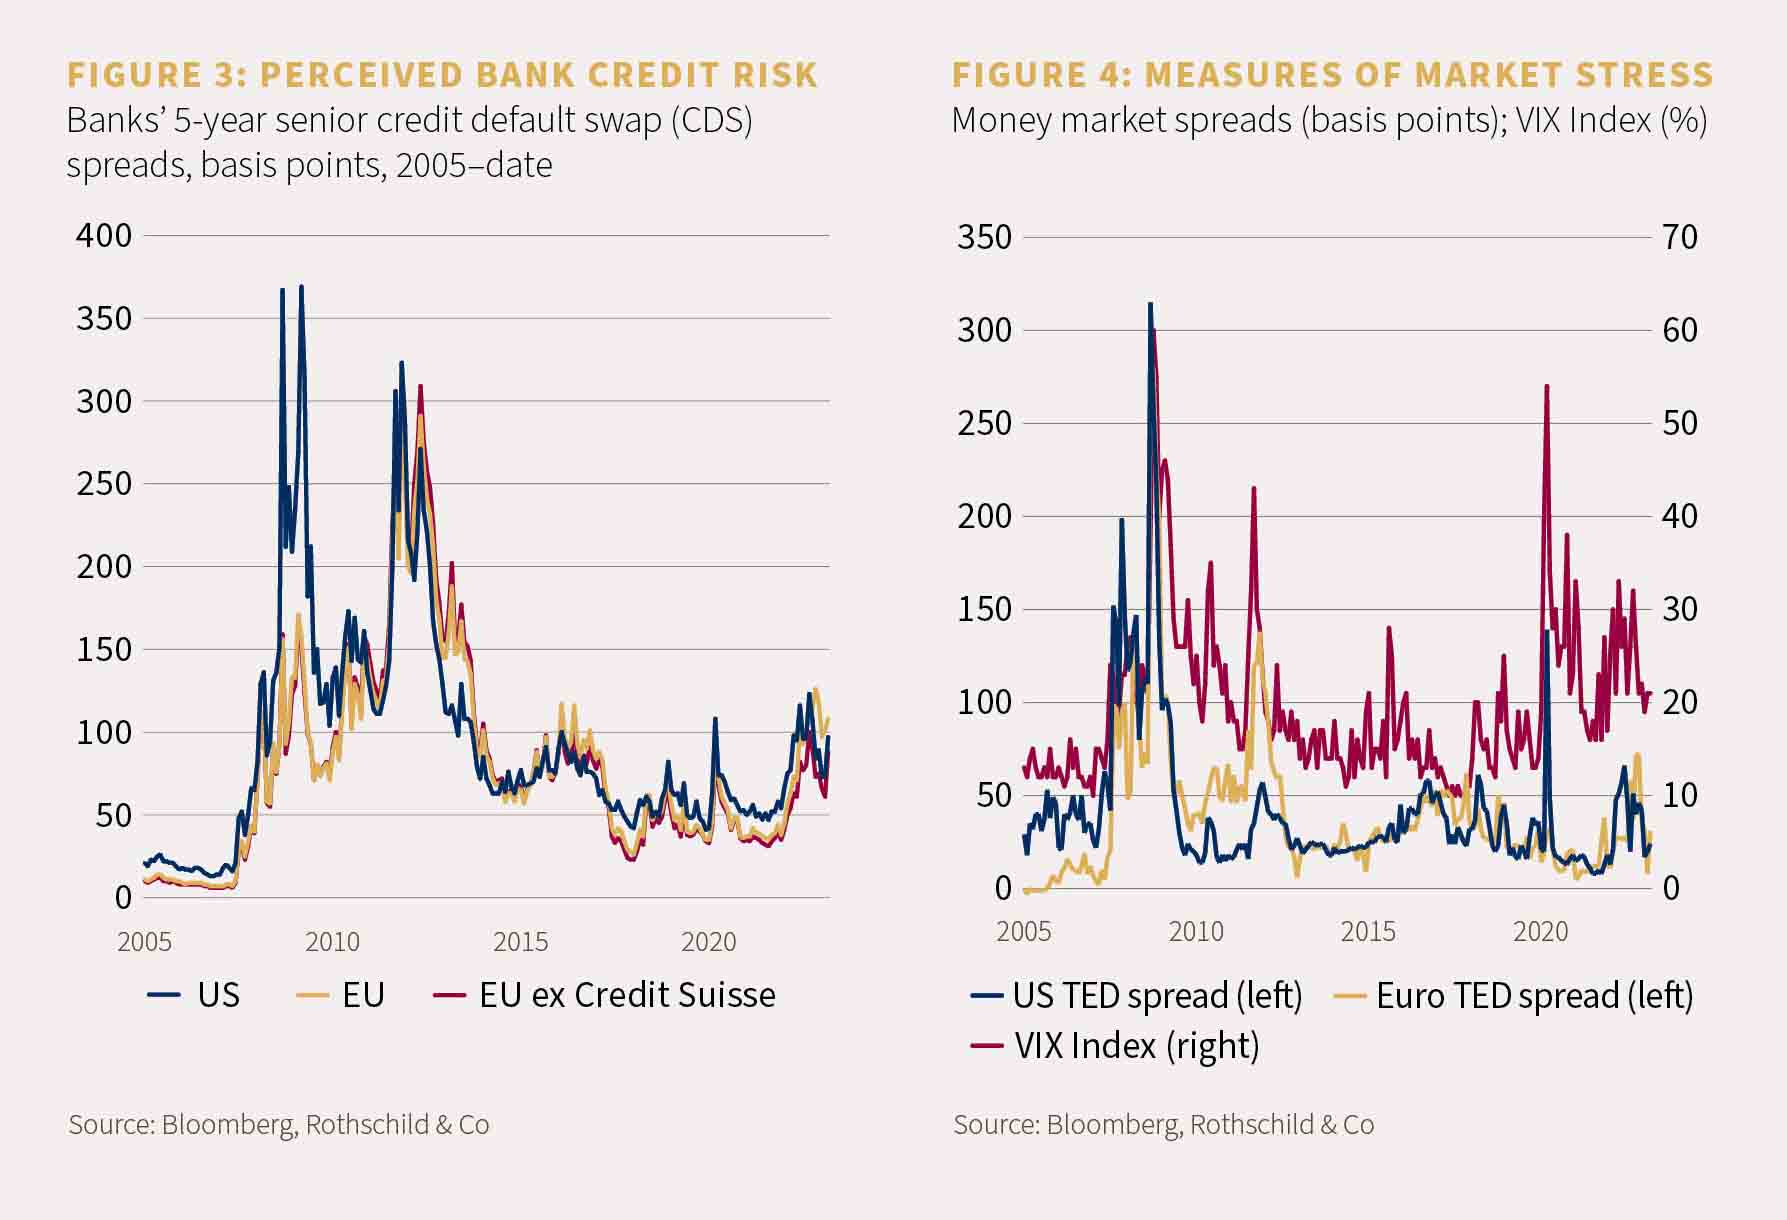 Chart showing perceived bank credit risk and chart showing measures of market stress